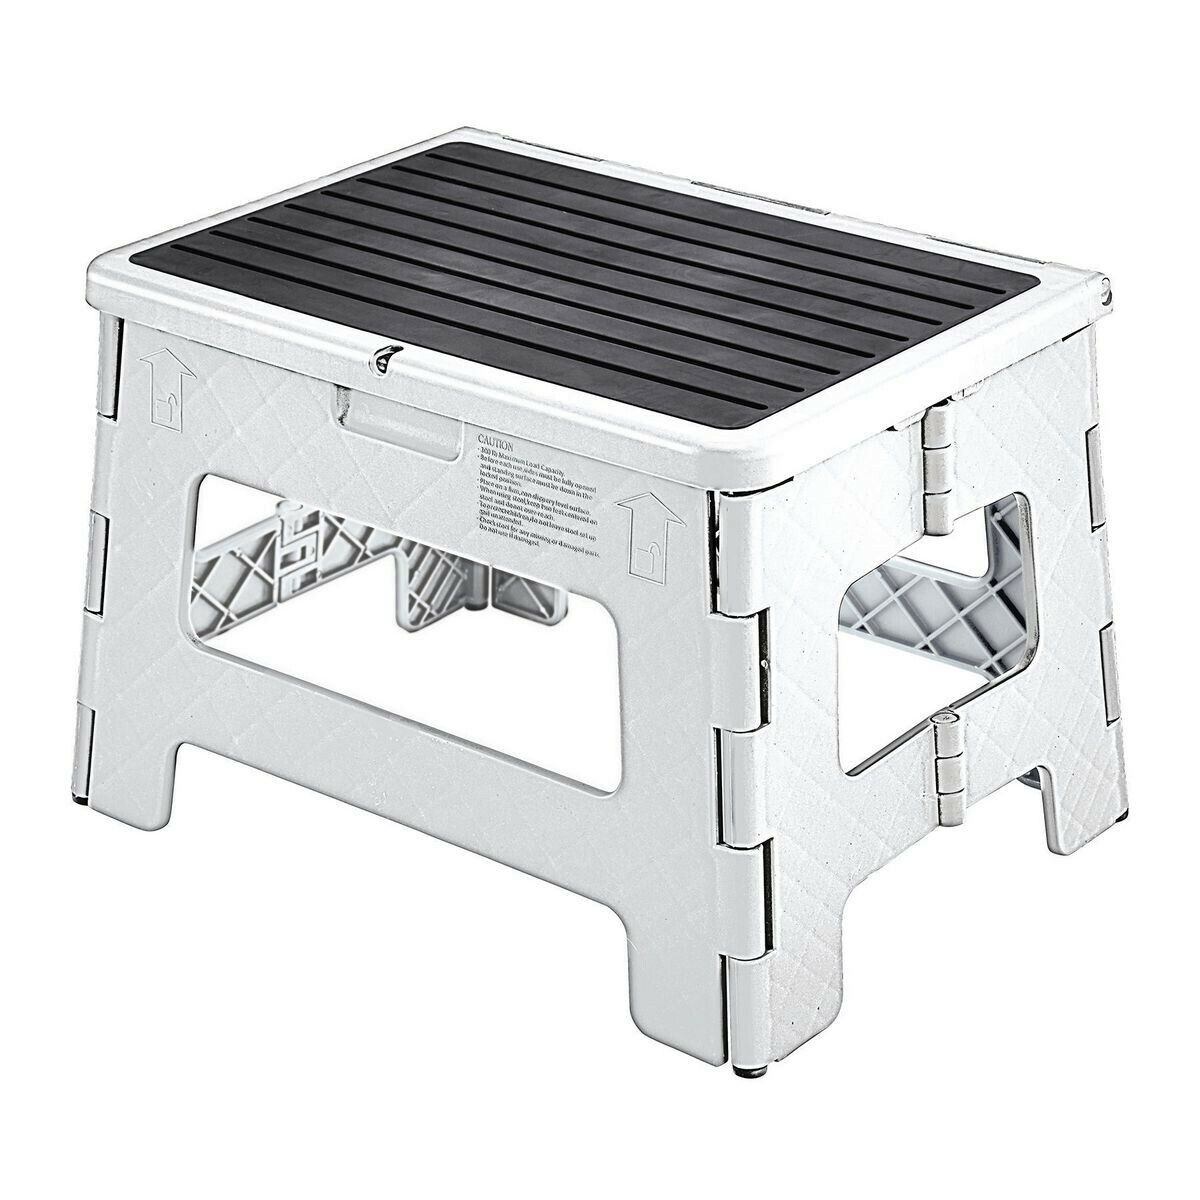 One-Step Rapid rise Max 57% OFF Folding Stool White- up to support 300 lb. of